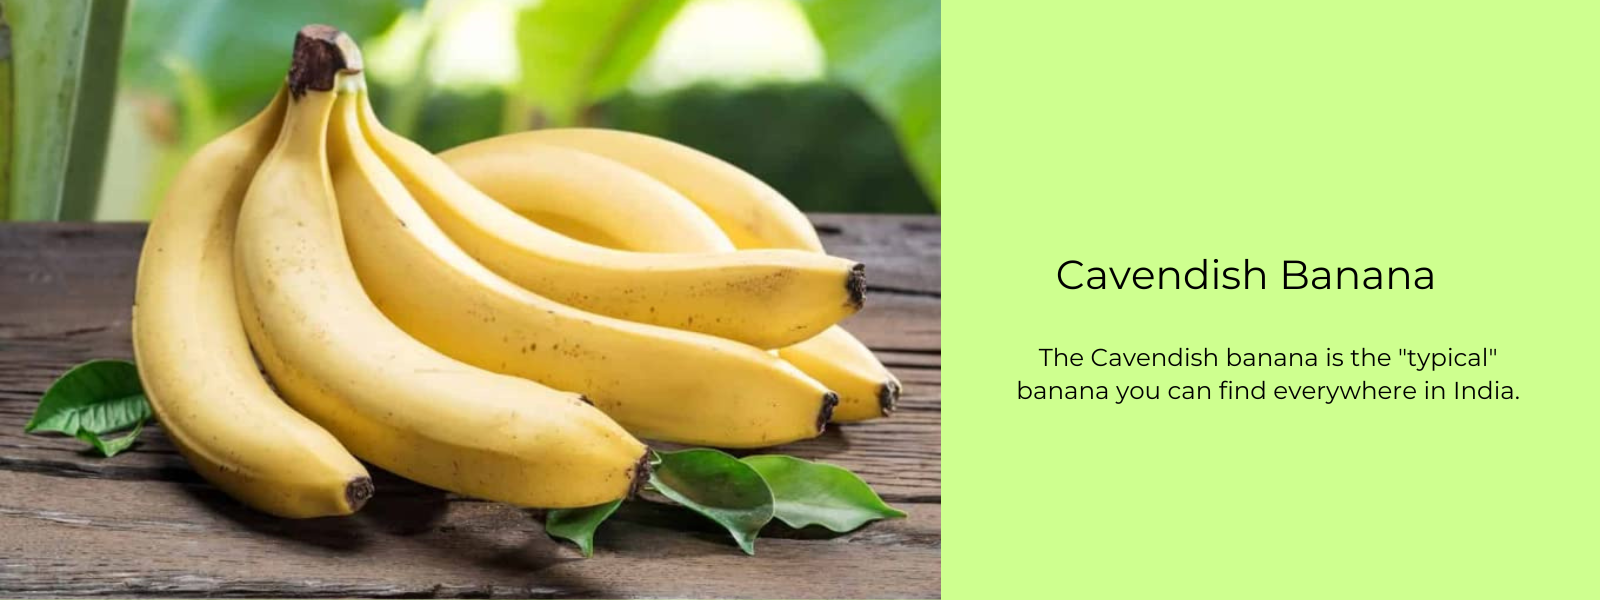 Cavendish Banana – Health Benefits, Uses and Important Facts